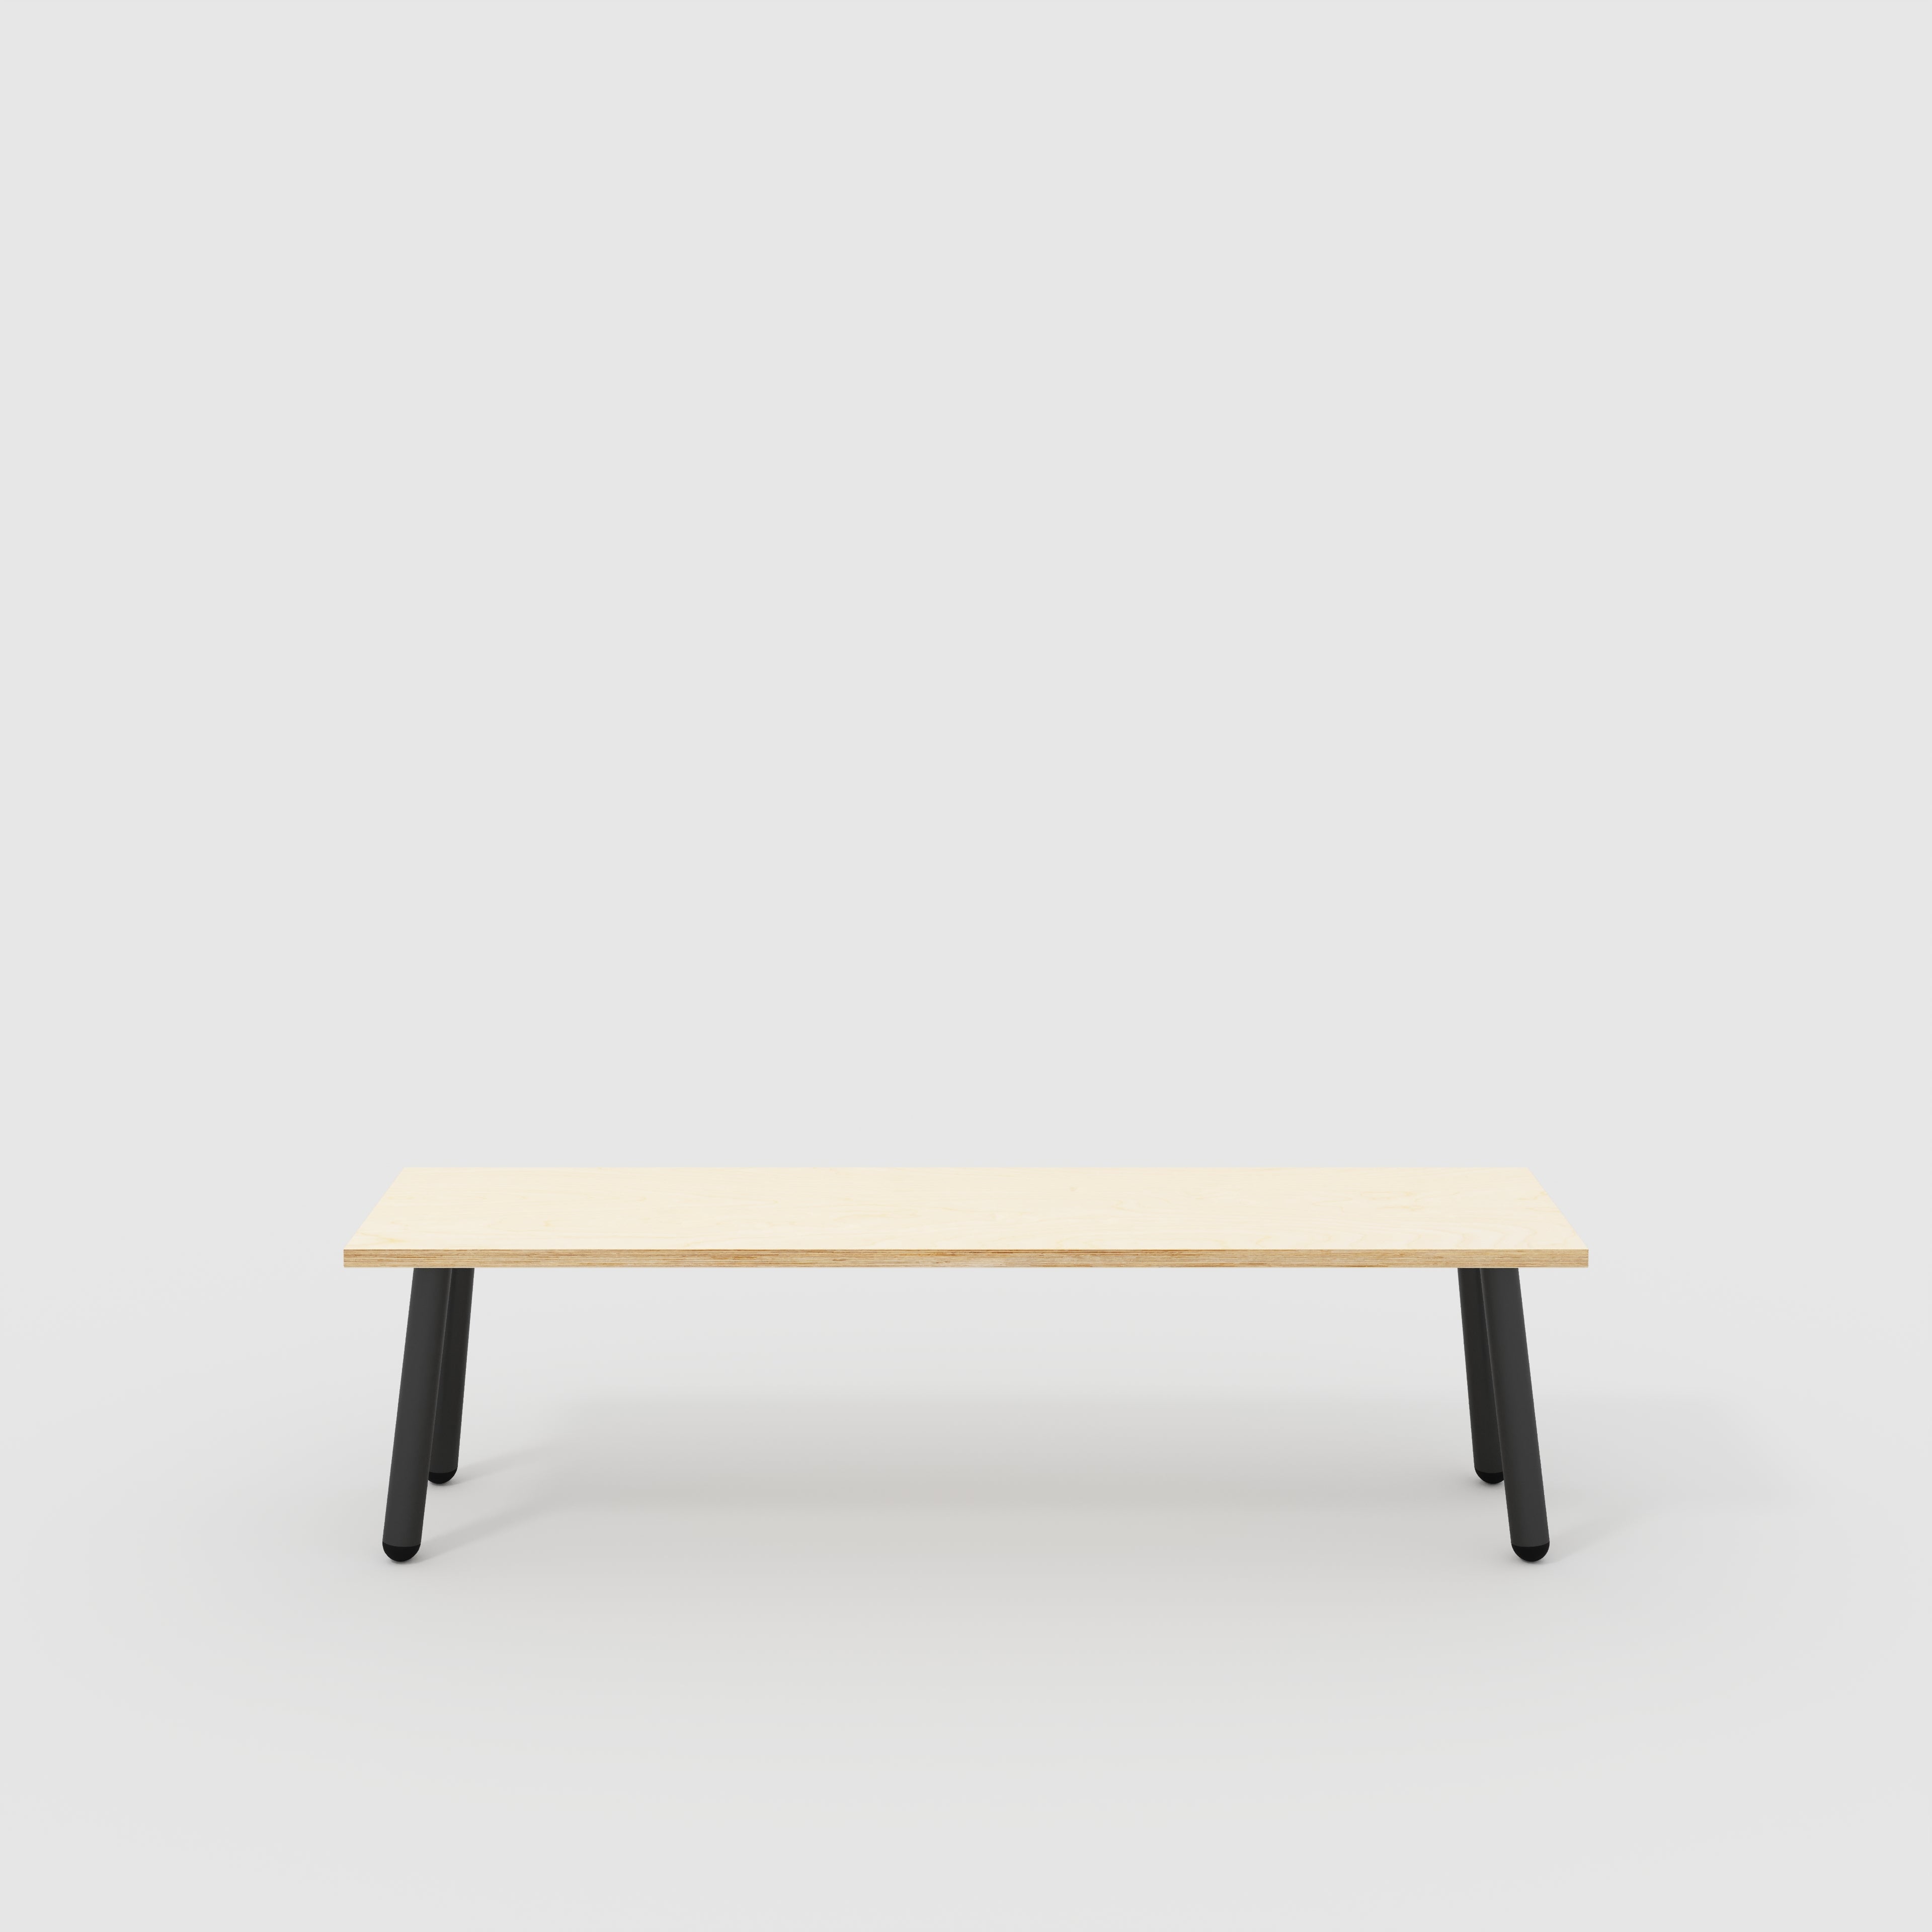 Bench Seat with Black Round Single Pin Legs - Plywood Birch - 1600(w) x 400(d)